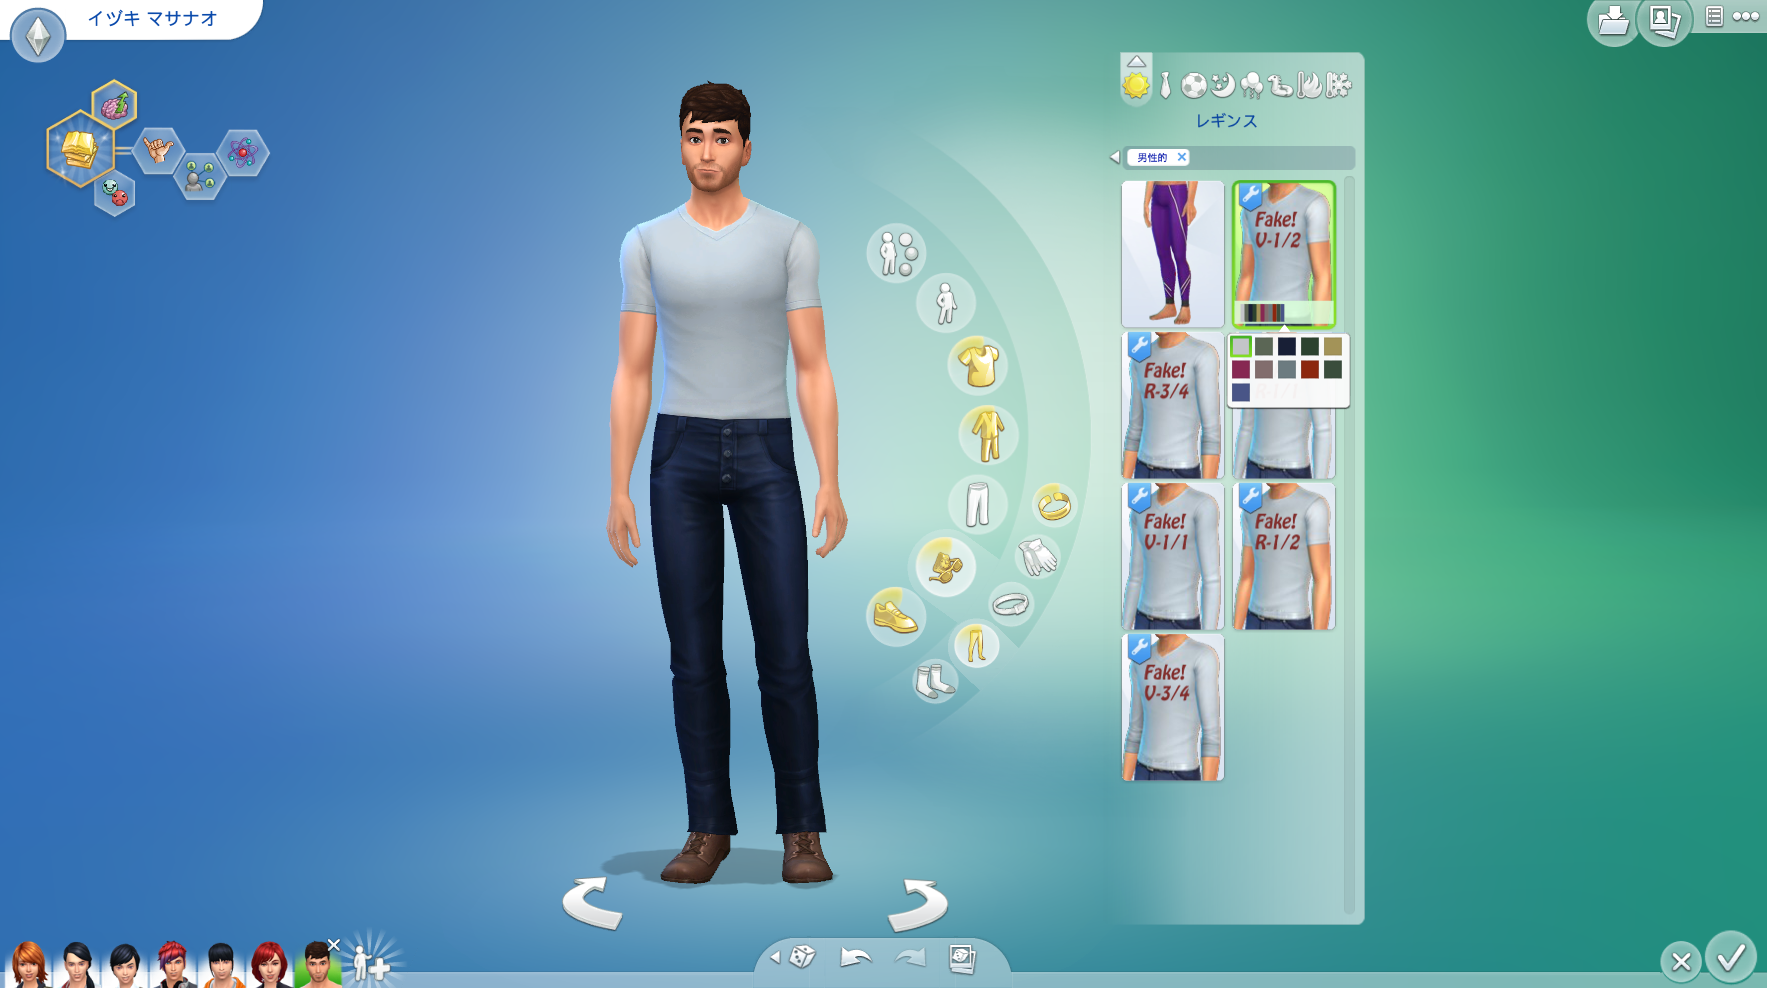 Mod The Sims - fake undershirts for male returns (Tights recolor)